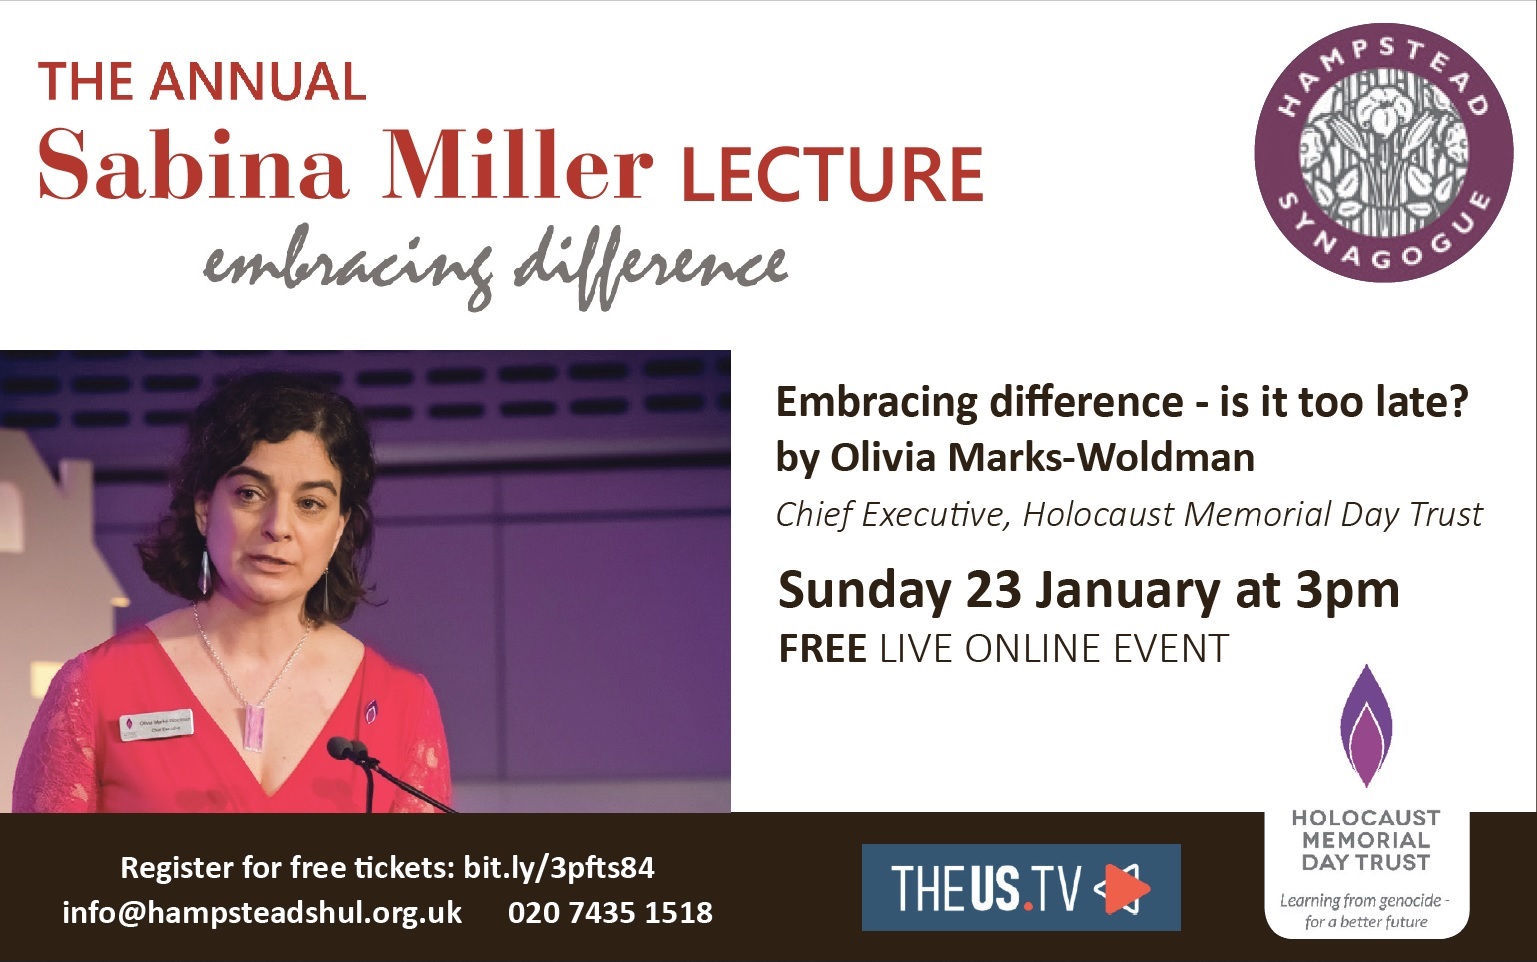 Sabina Miller Annual Lecture: "Embracing difference - is it too late?"